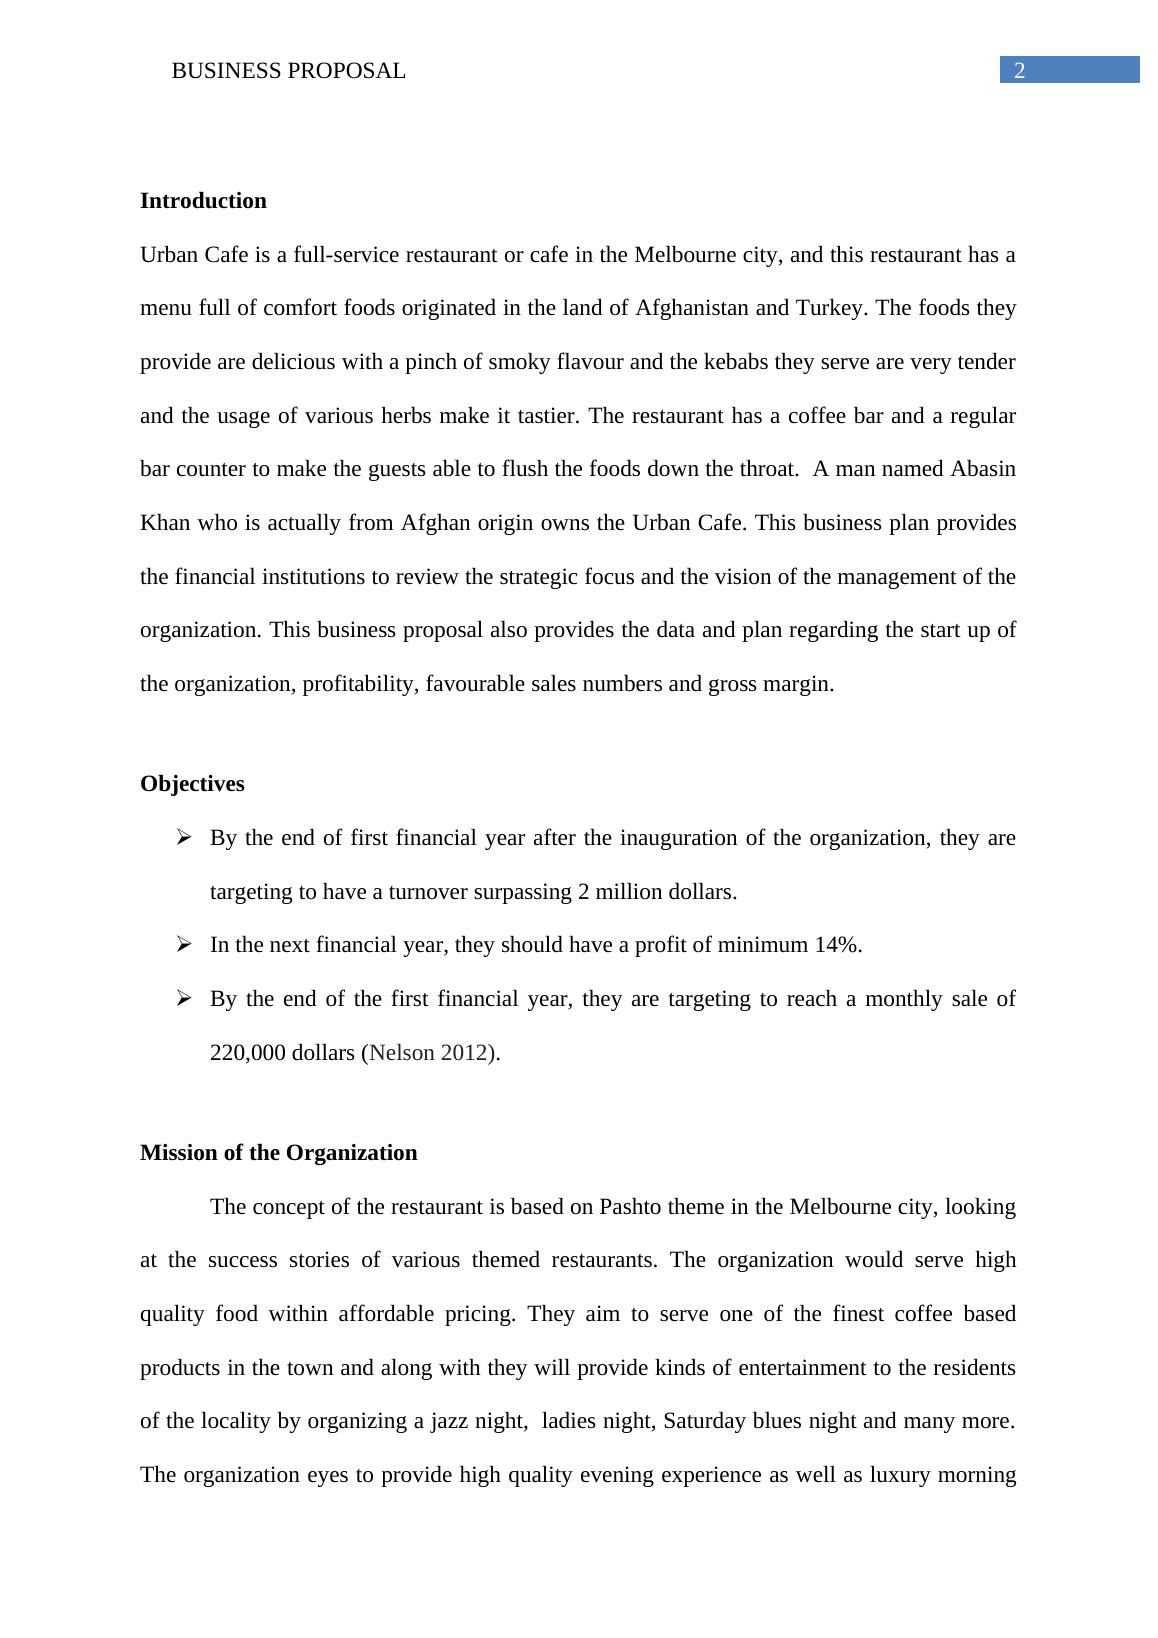 Paper On Business Proposal for Organization_3